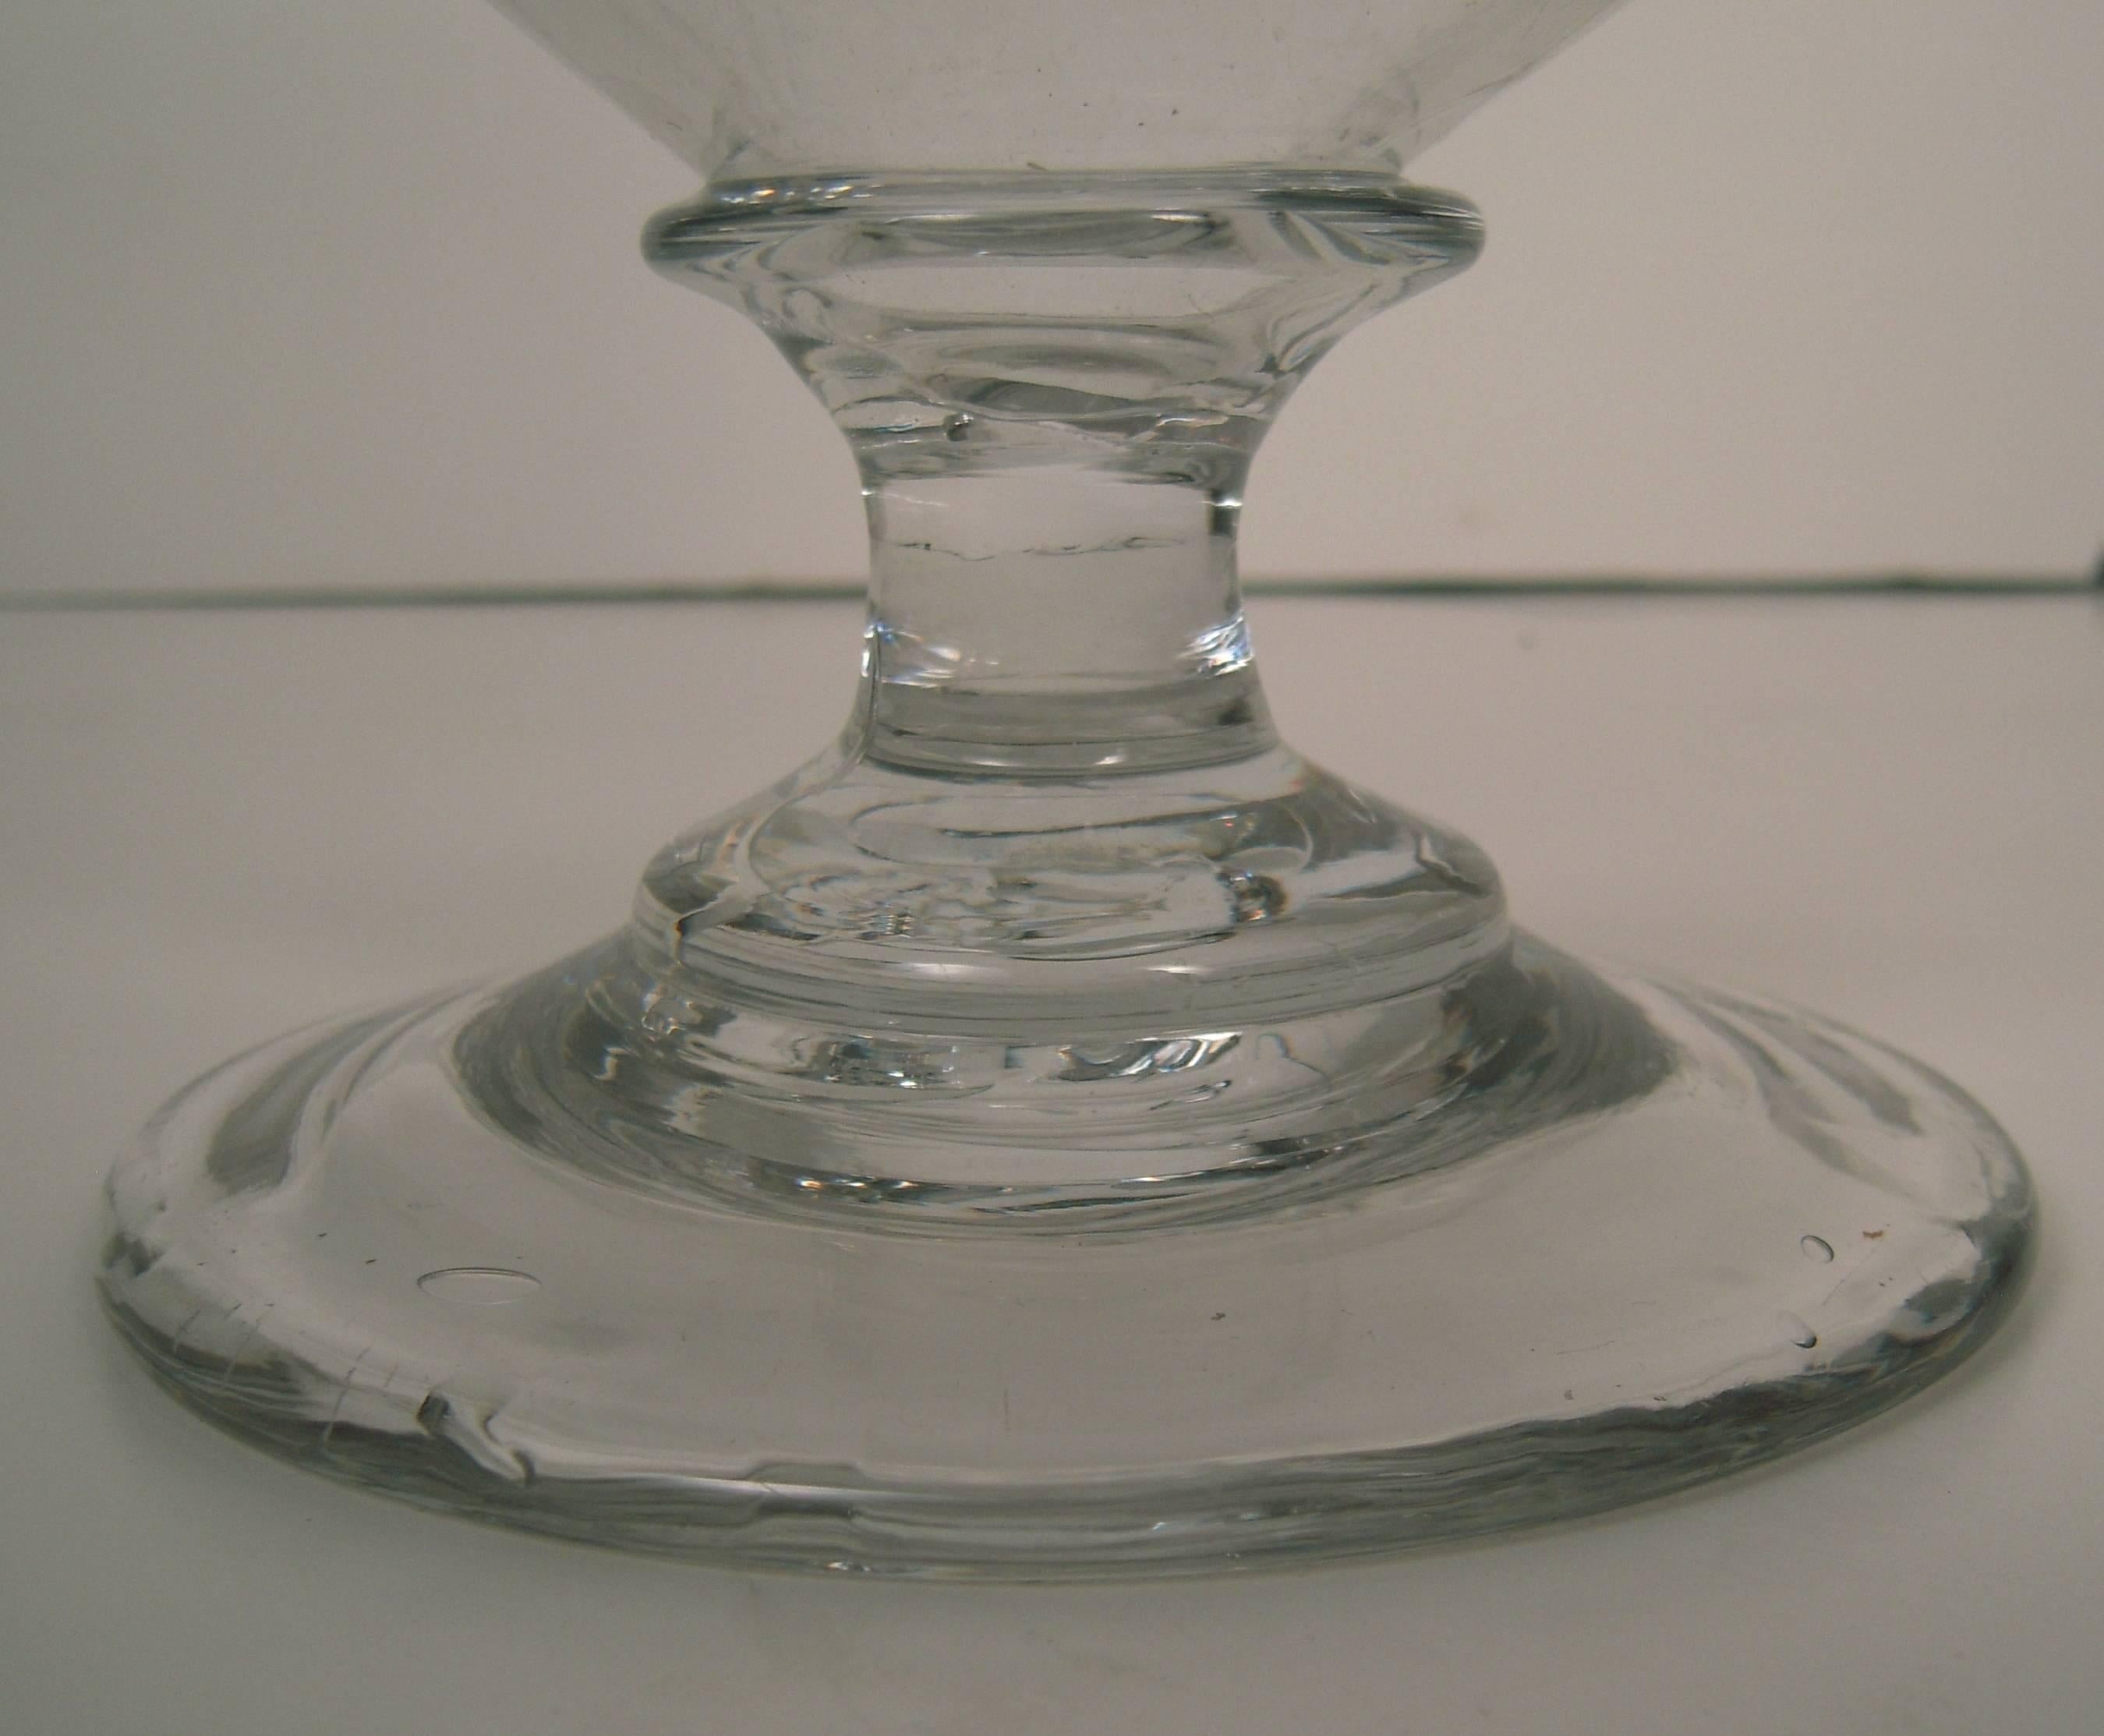 A large 19th century American colorless blown glass vase, circa 1830, of inverted bell form supported on a spreading circular base with pontil mark on the underside. 

Height: 10